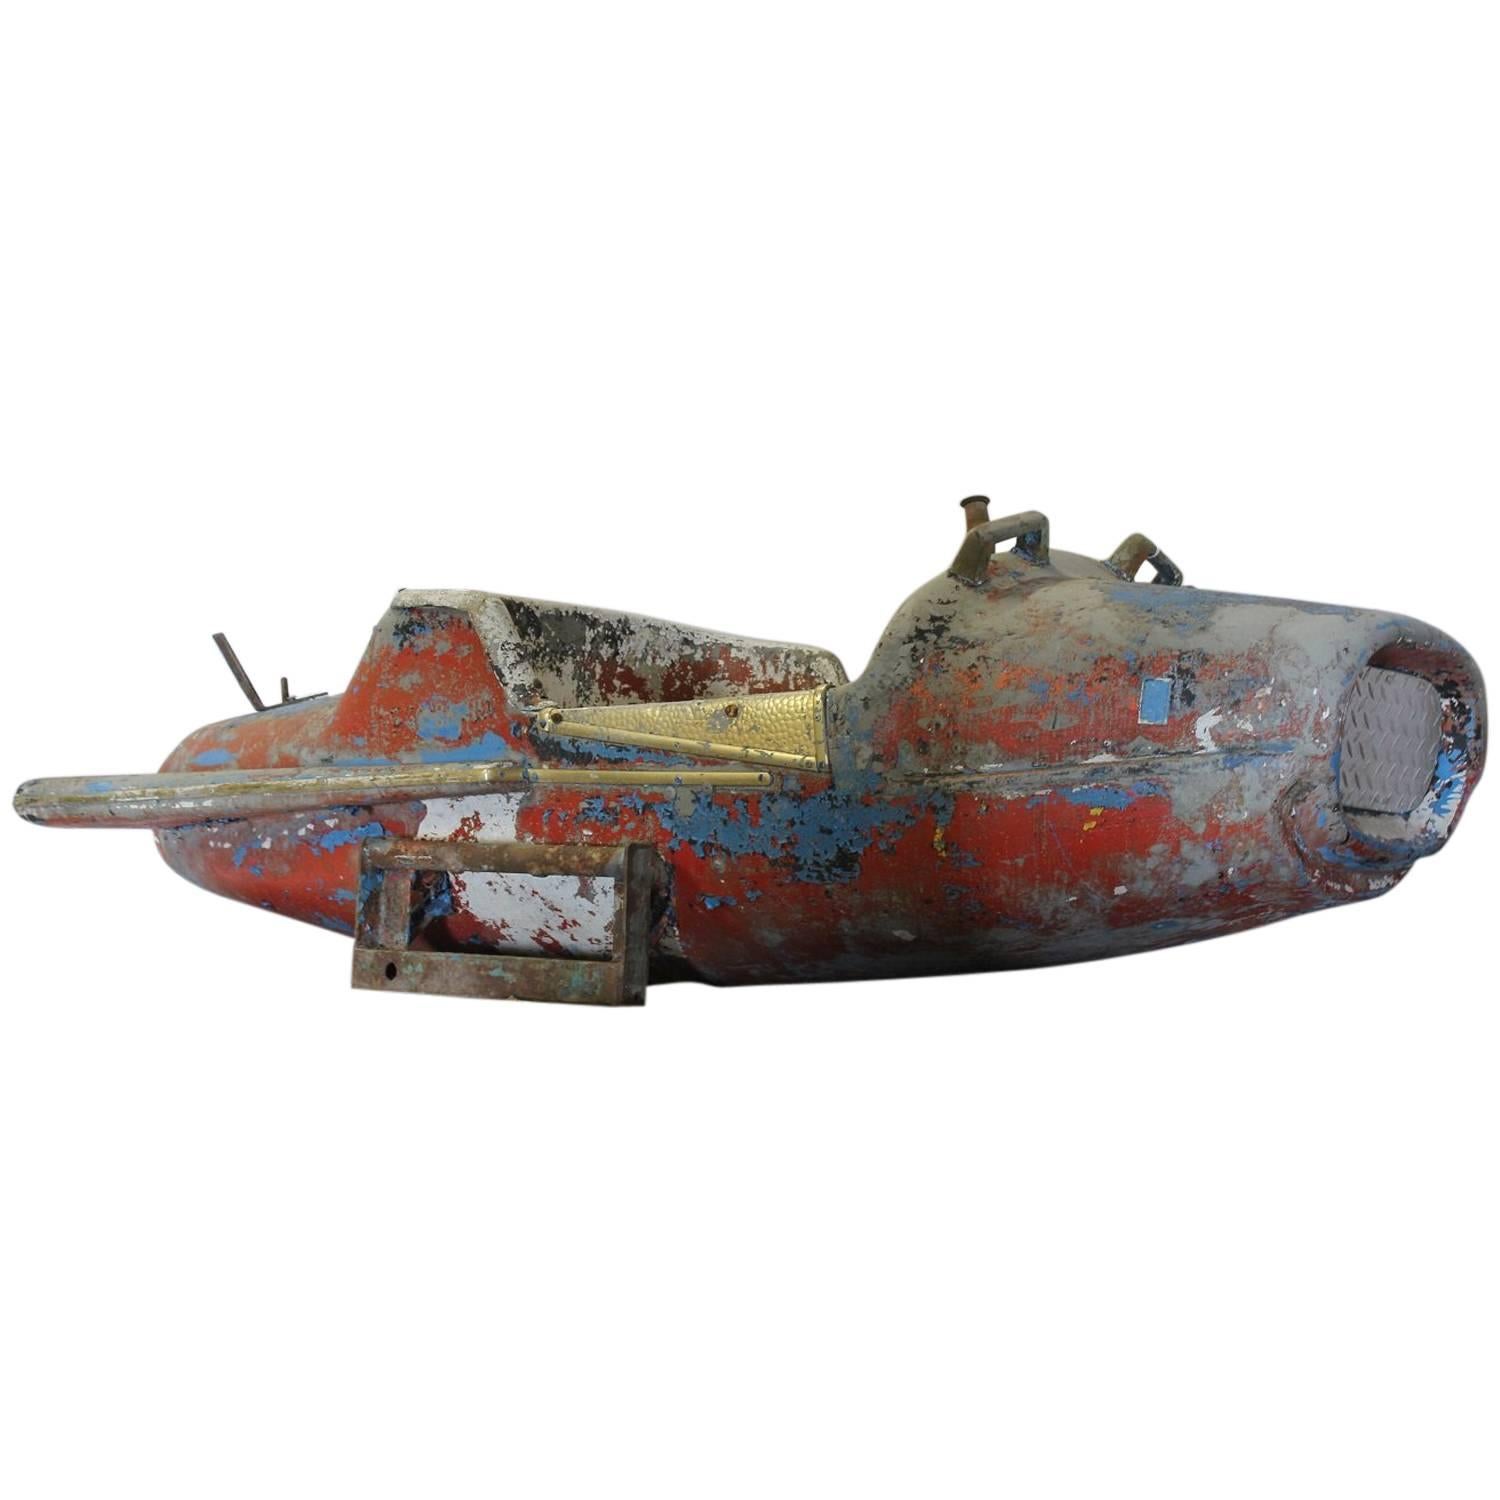 1950s American Carnival Space Ship Ride For Sale